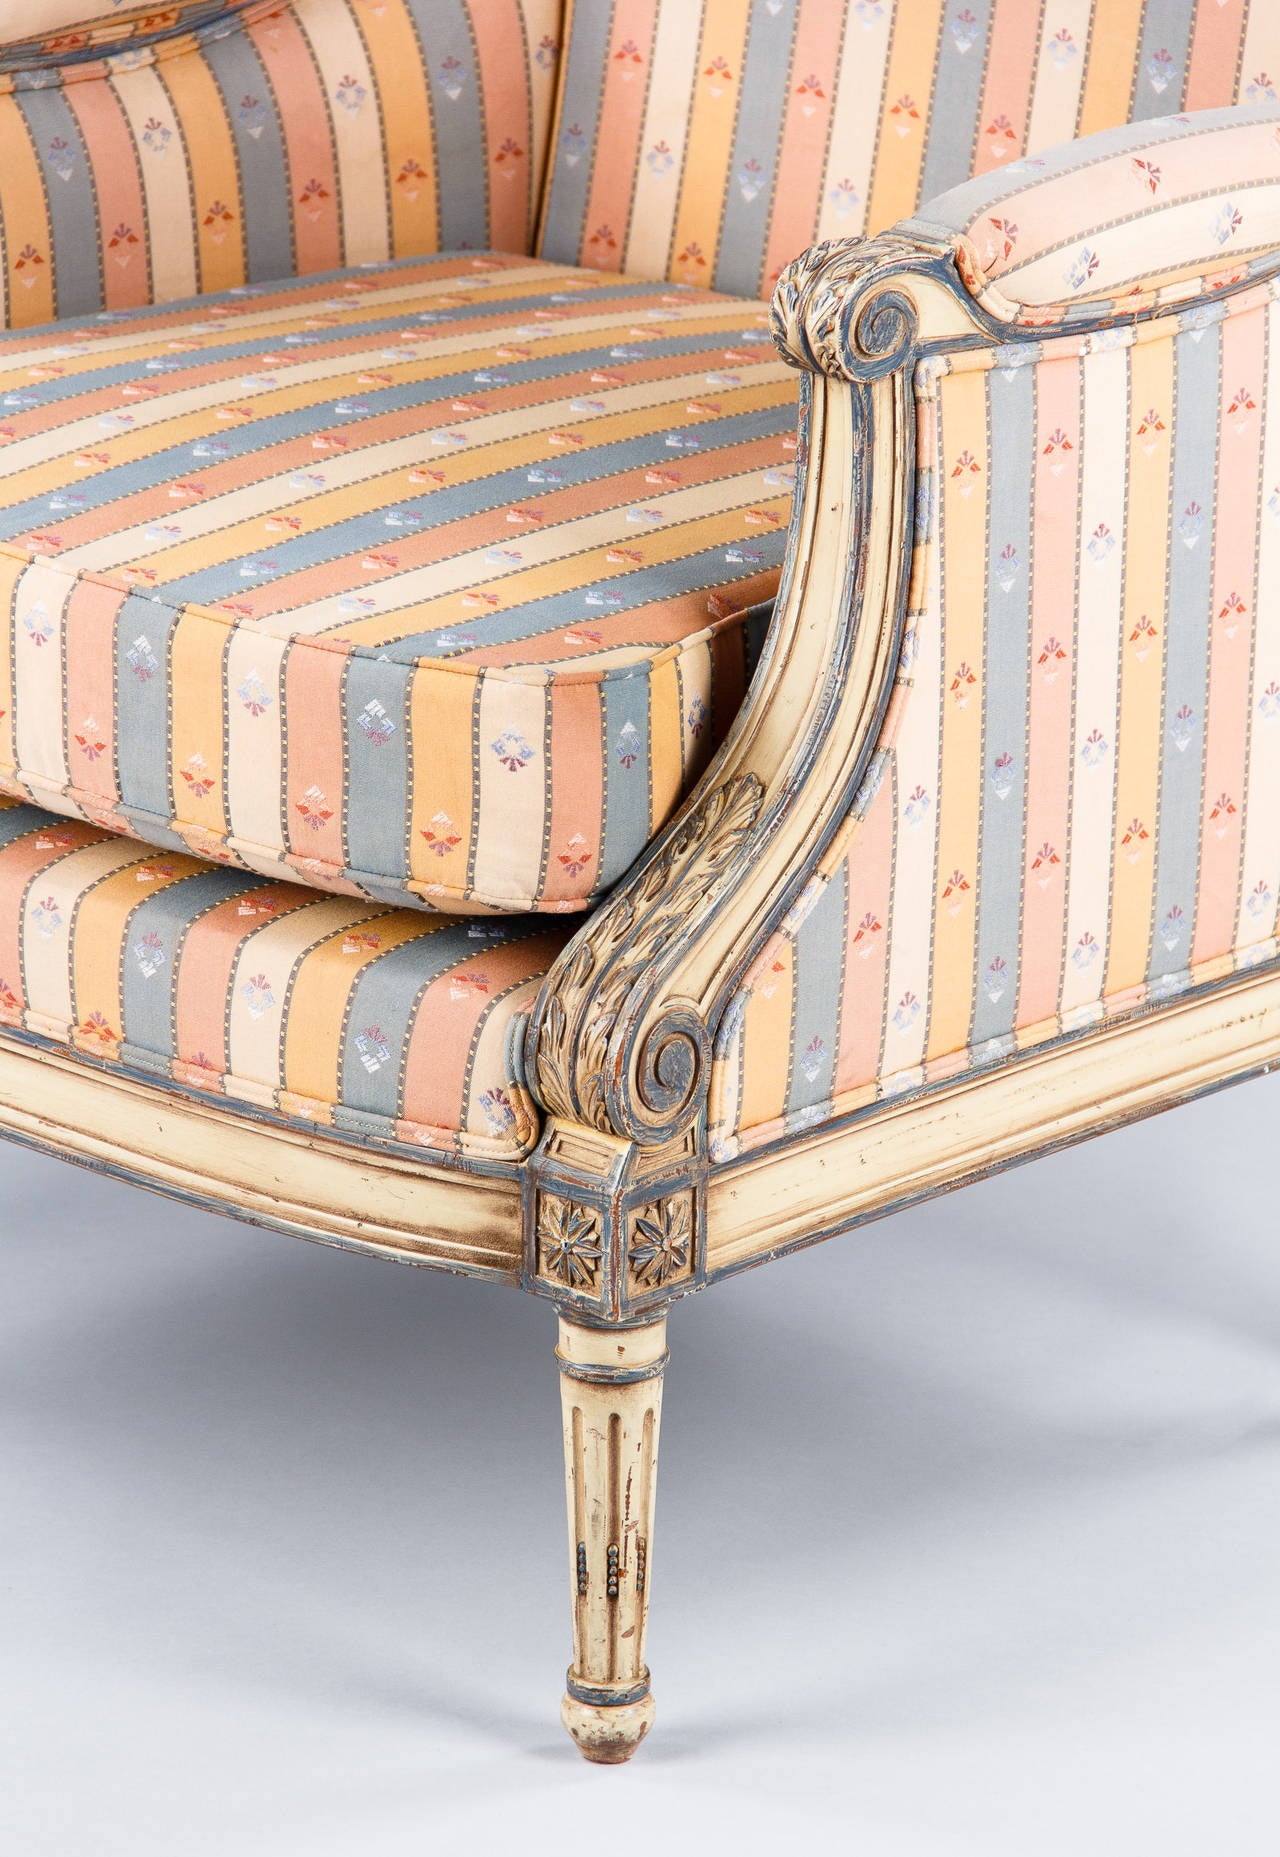 Created back in the 18th century, the marquise is similar to the bergère but lower and wider. This mid-1900s marquise in the Louis XVI style is painted in off-white and light blue tones. The legs are fluted and the armrests have carvings of acanthus